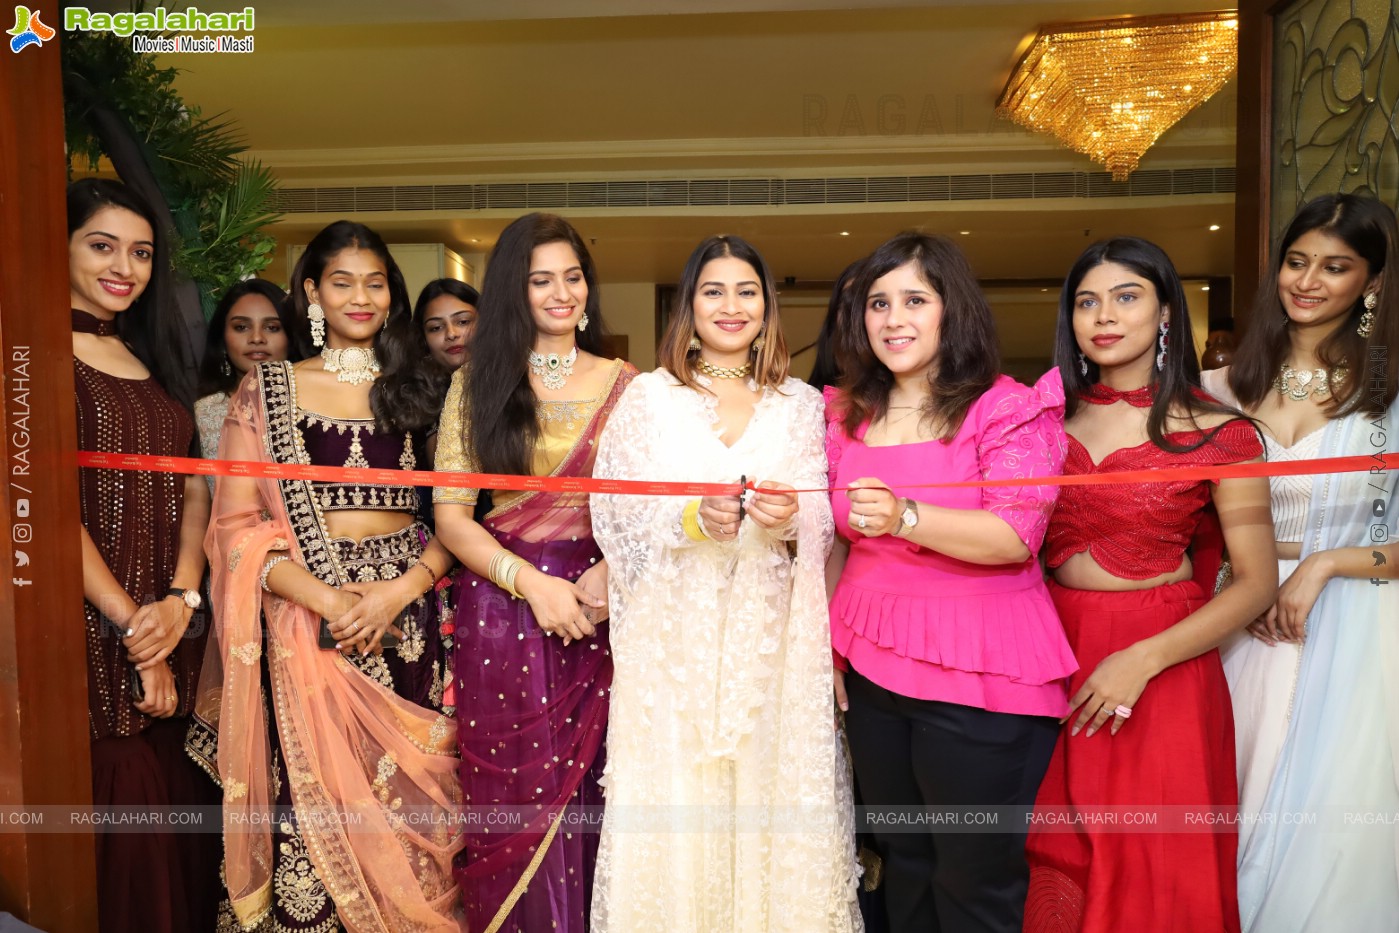 Sutraa Exhibition, Hyderabad inaugurated by big boss fame Inaya Sultan